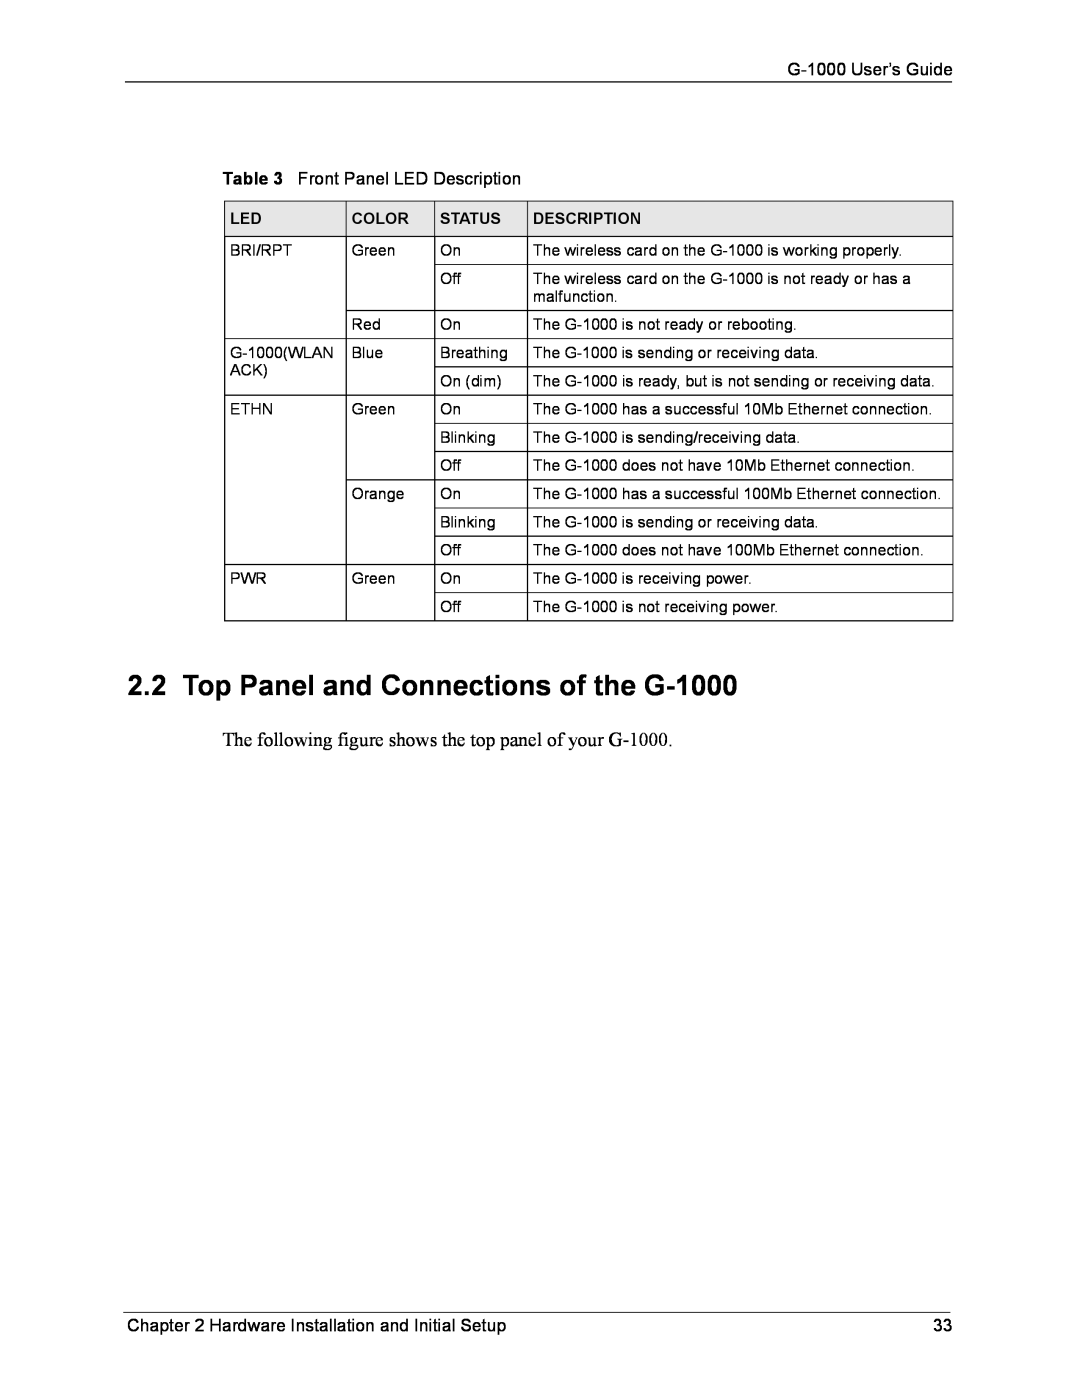 ZyXEL Communications Top Panel and Connections of the G-1000, G-1000 User’s Guide Front Panel LED Description, Color 